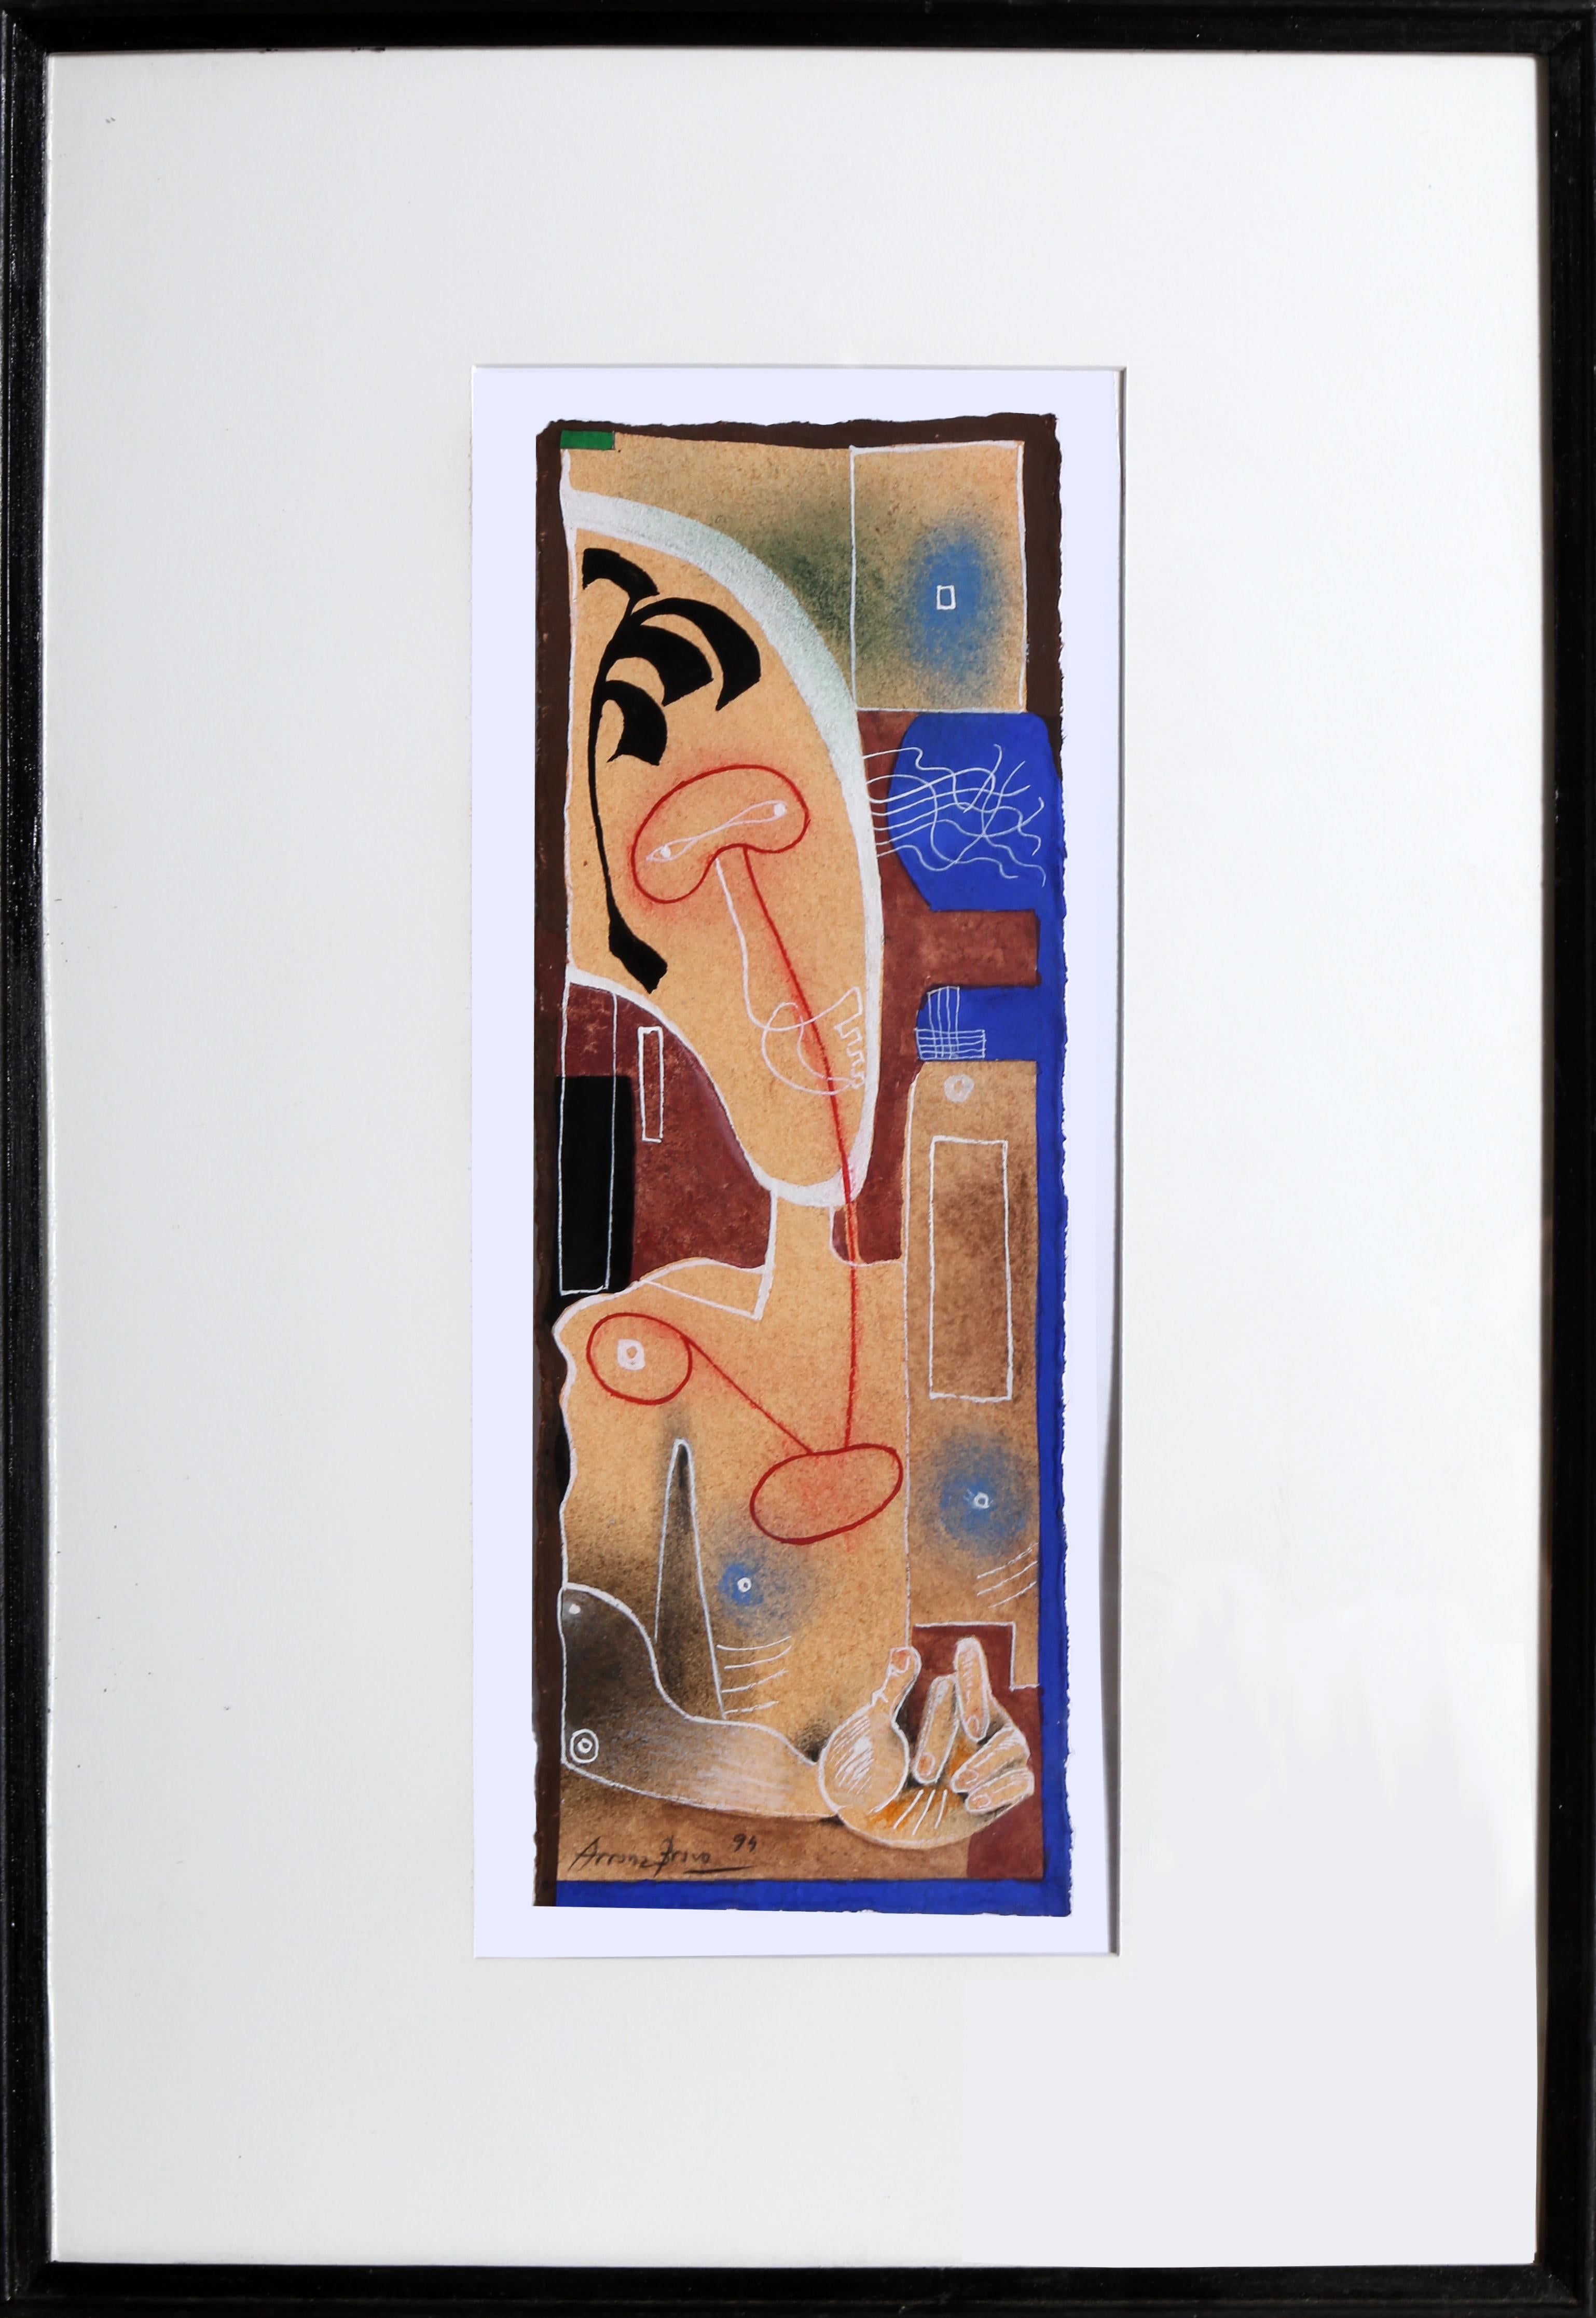 Artist: Eduardo Arranz-Bravo, Spanish (1941 - )
Title:	Cadaques No.24
Year:	1994
Medium:	Mixed Media (Watercolor and Color pencil) on paper, signed and dated
Size: 13.75 x 5 in. (34.93 x 12.7 cm)
Frame: 21 x 14.75 inches